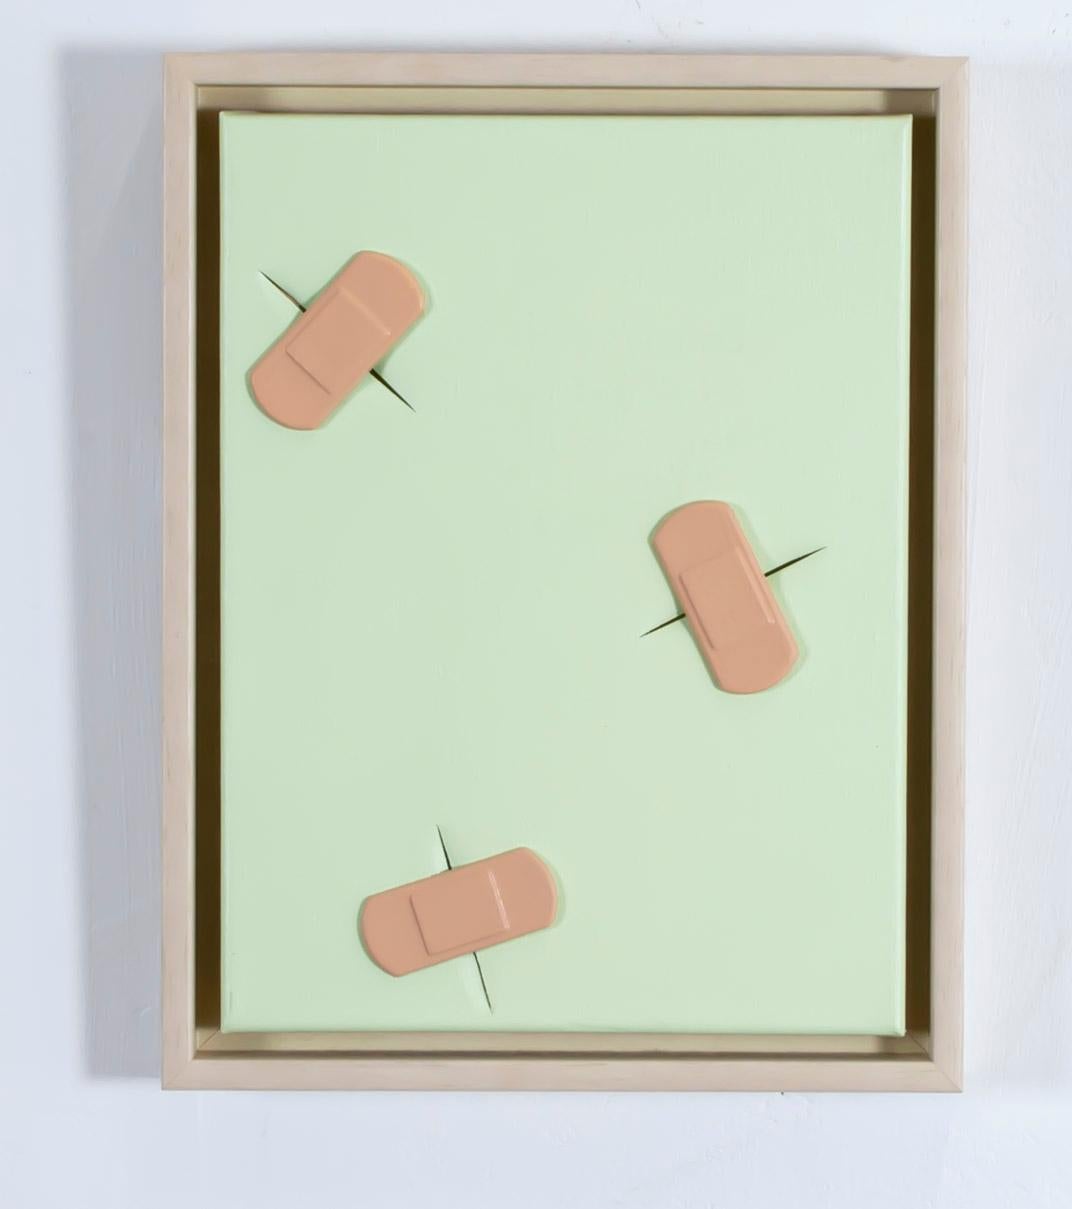 «Boo-boos (by Lucio)» teal green cut canvas covered with cast plastic band-aids - Mixed Media Art by Dustin Cook